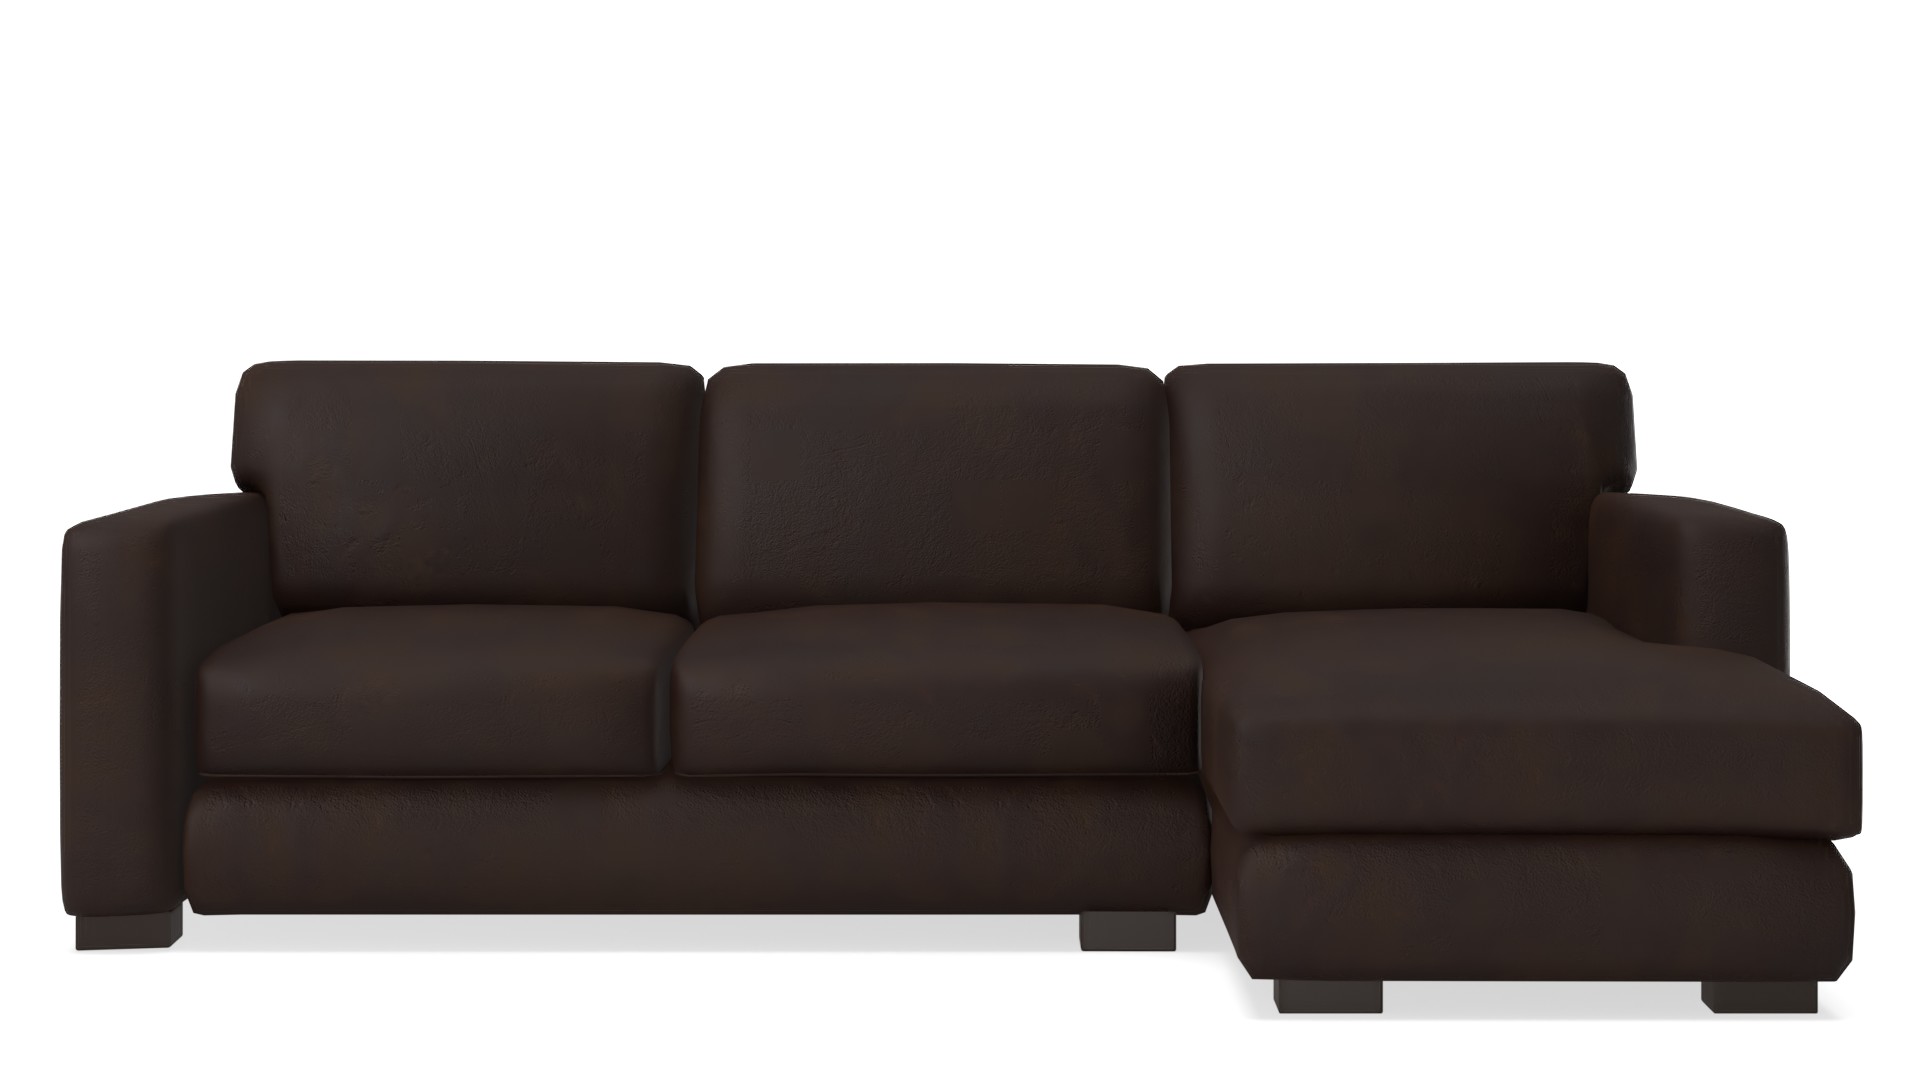 turner roll arm leather sofa reviews